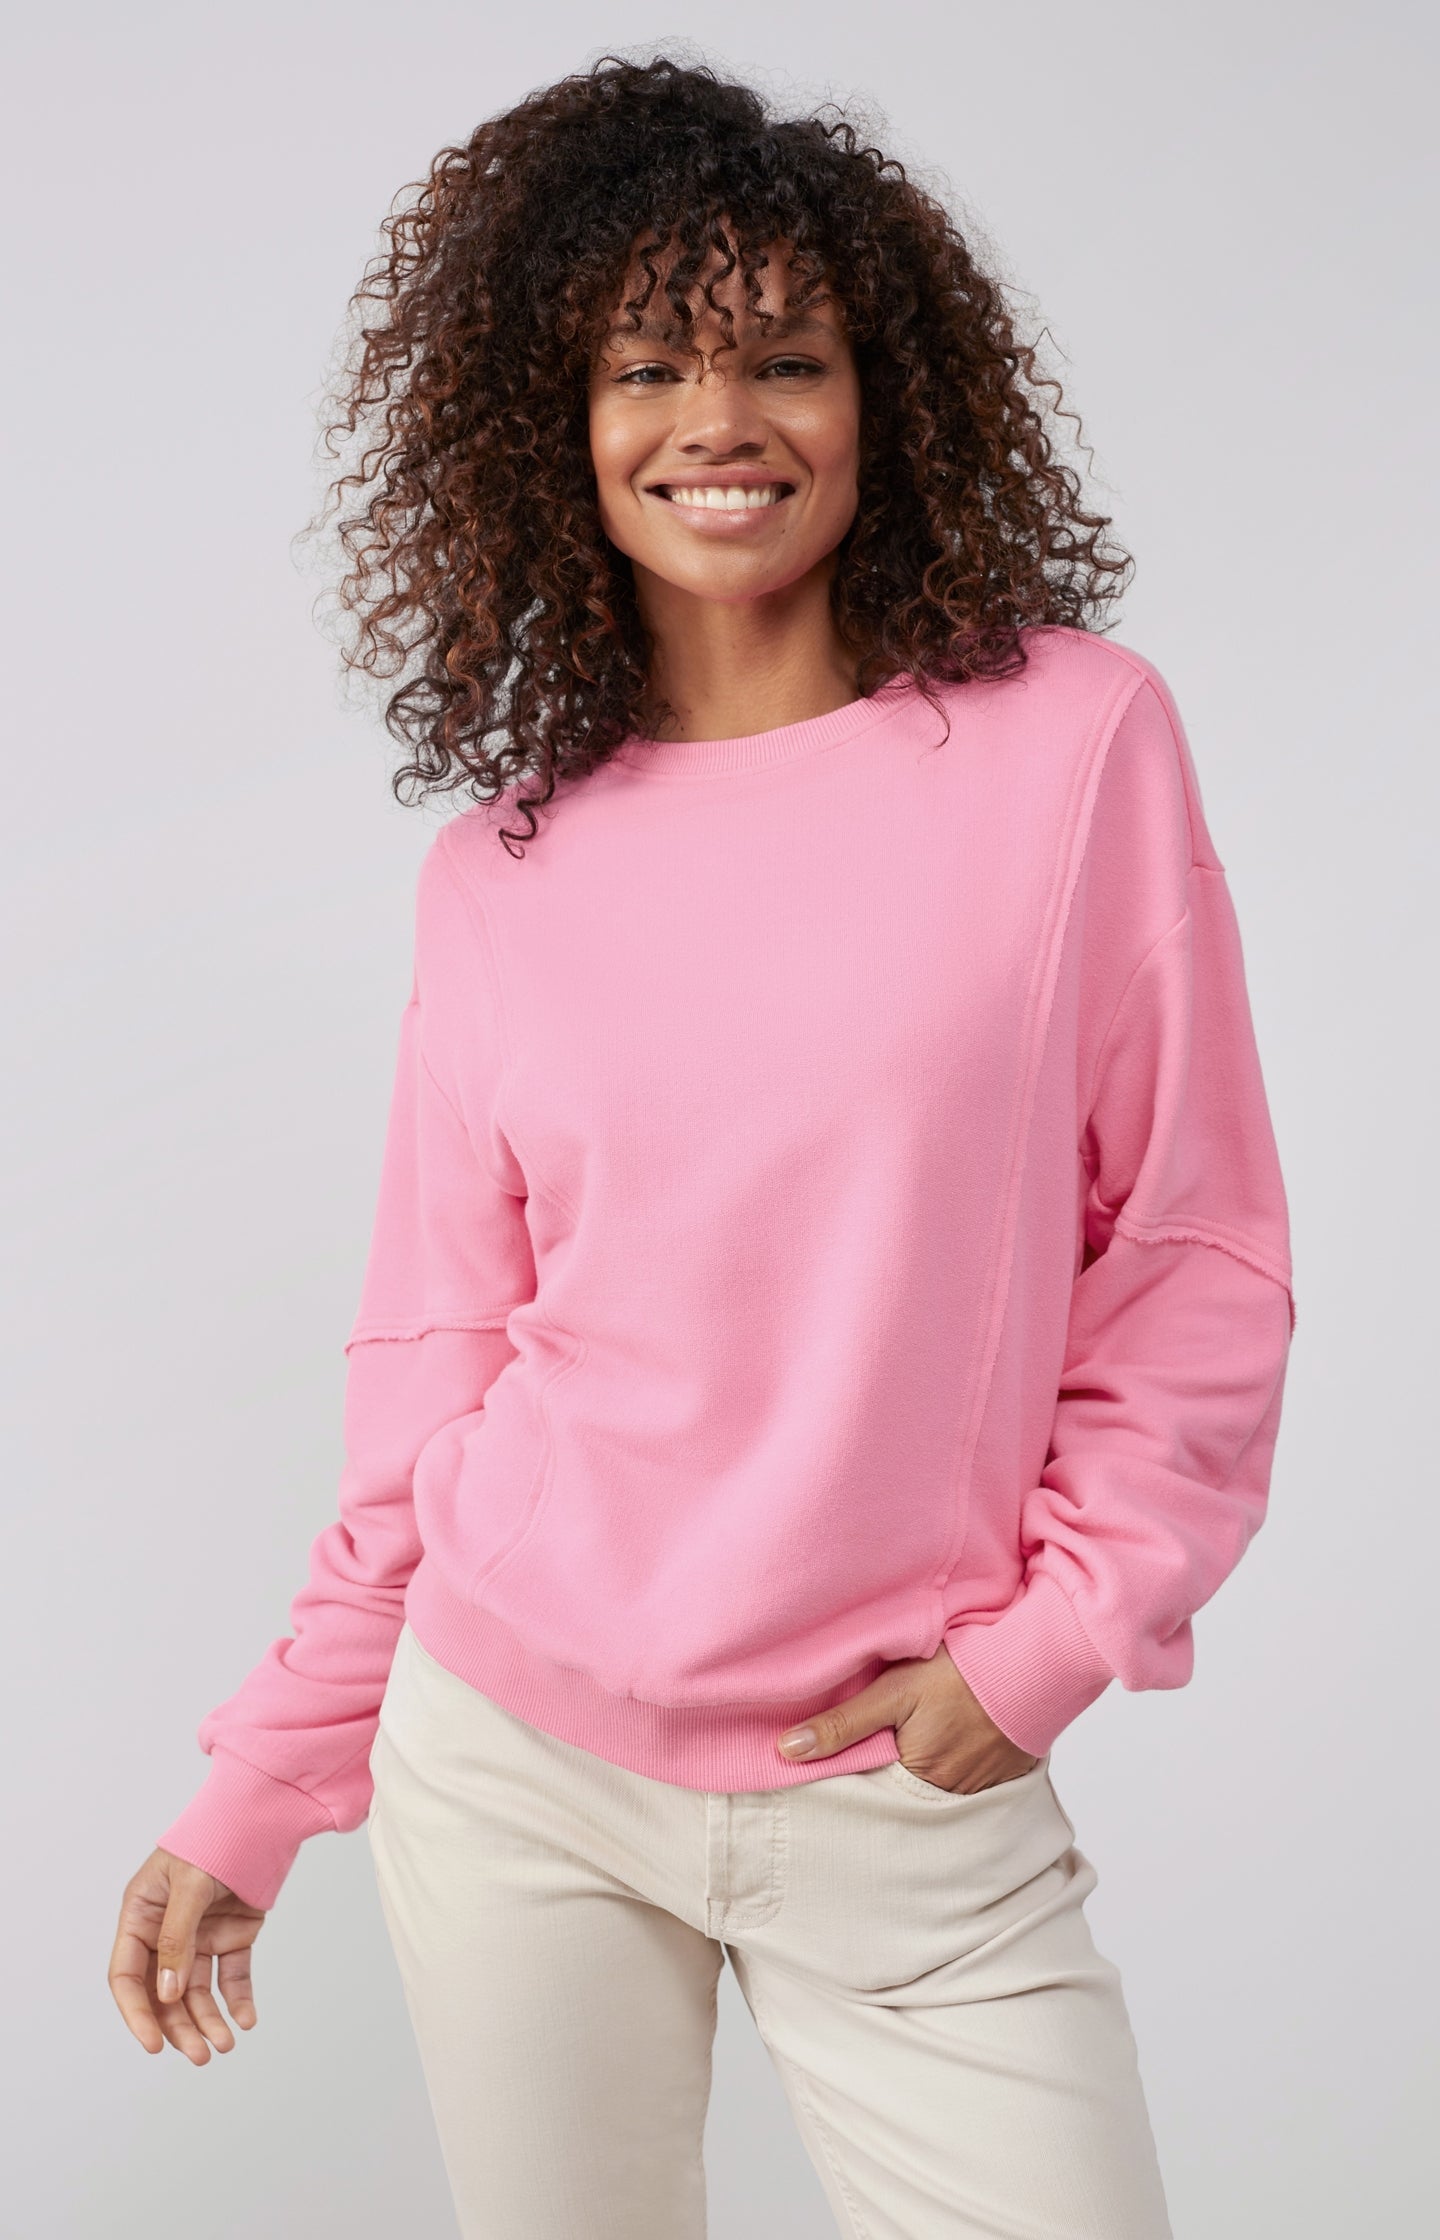 Sweatshirt with crewneck, long sleeves and seam details